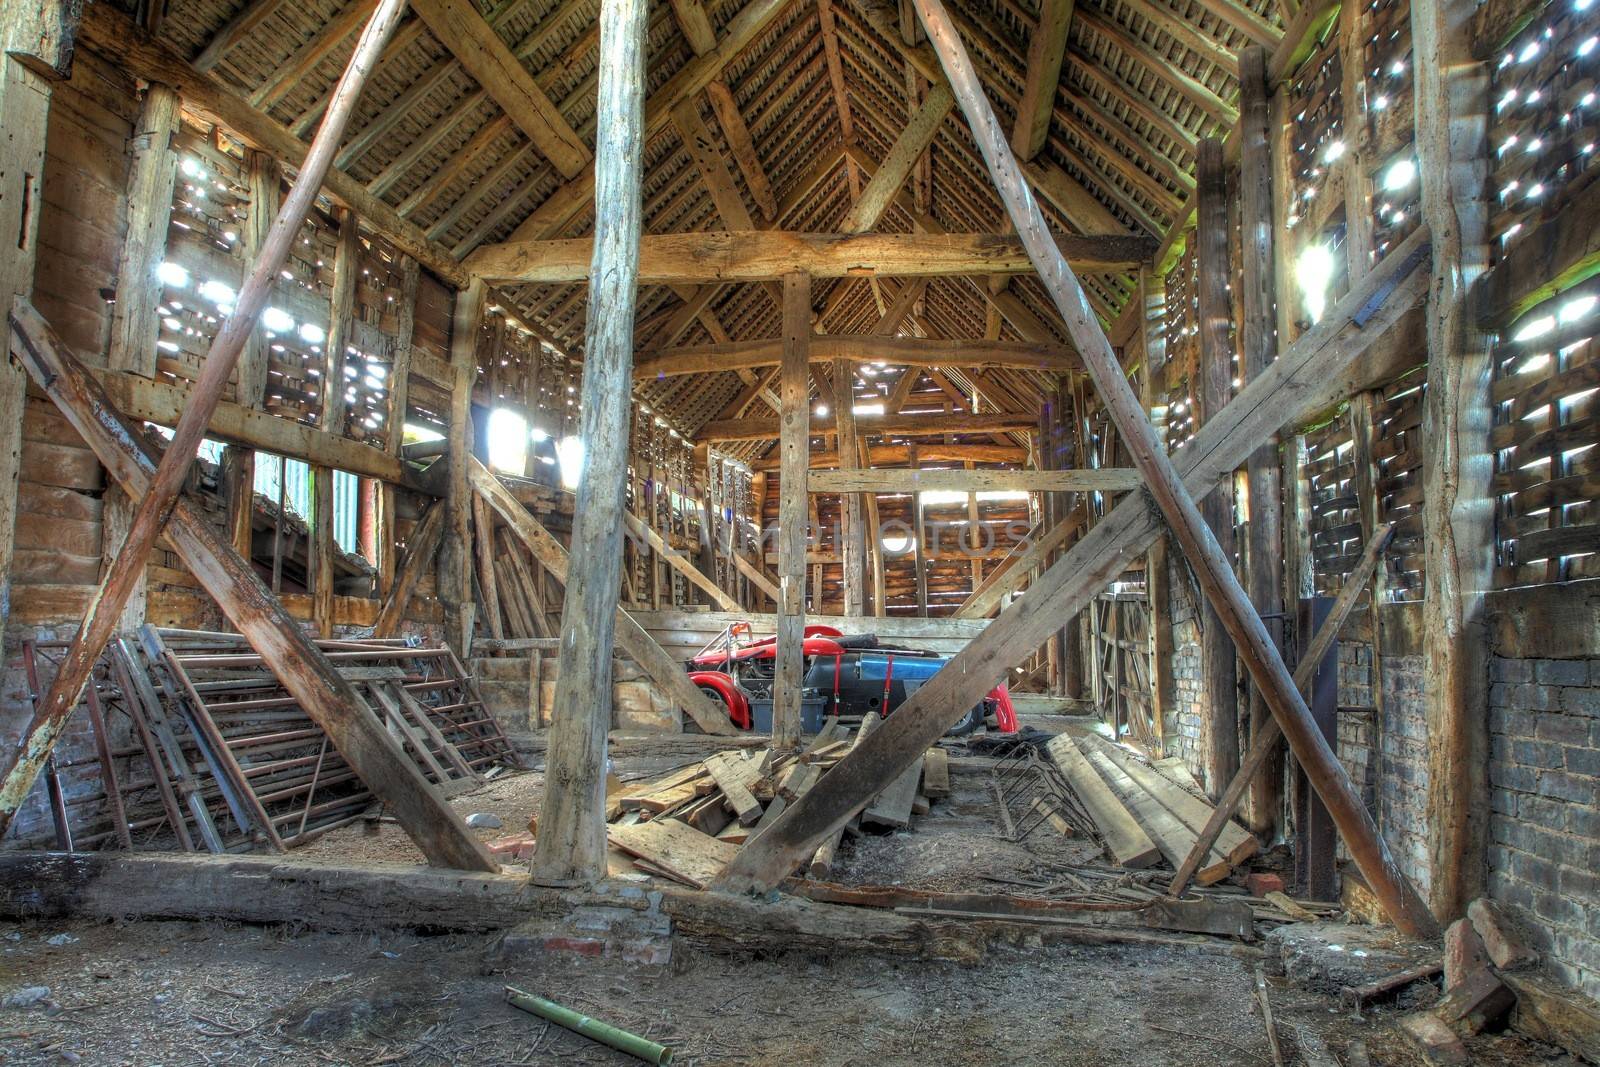 Large timber-framed and brick hay barn, Worcestershire, England.
